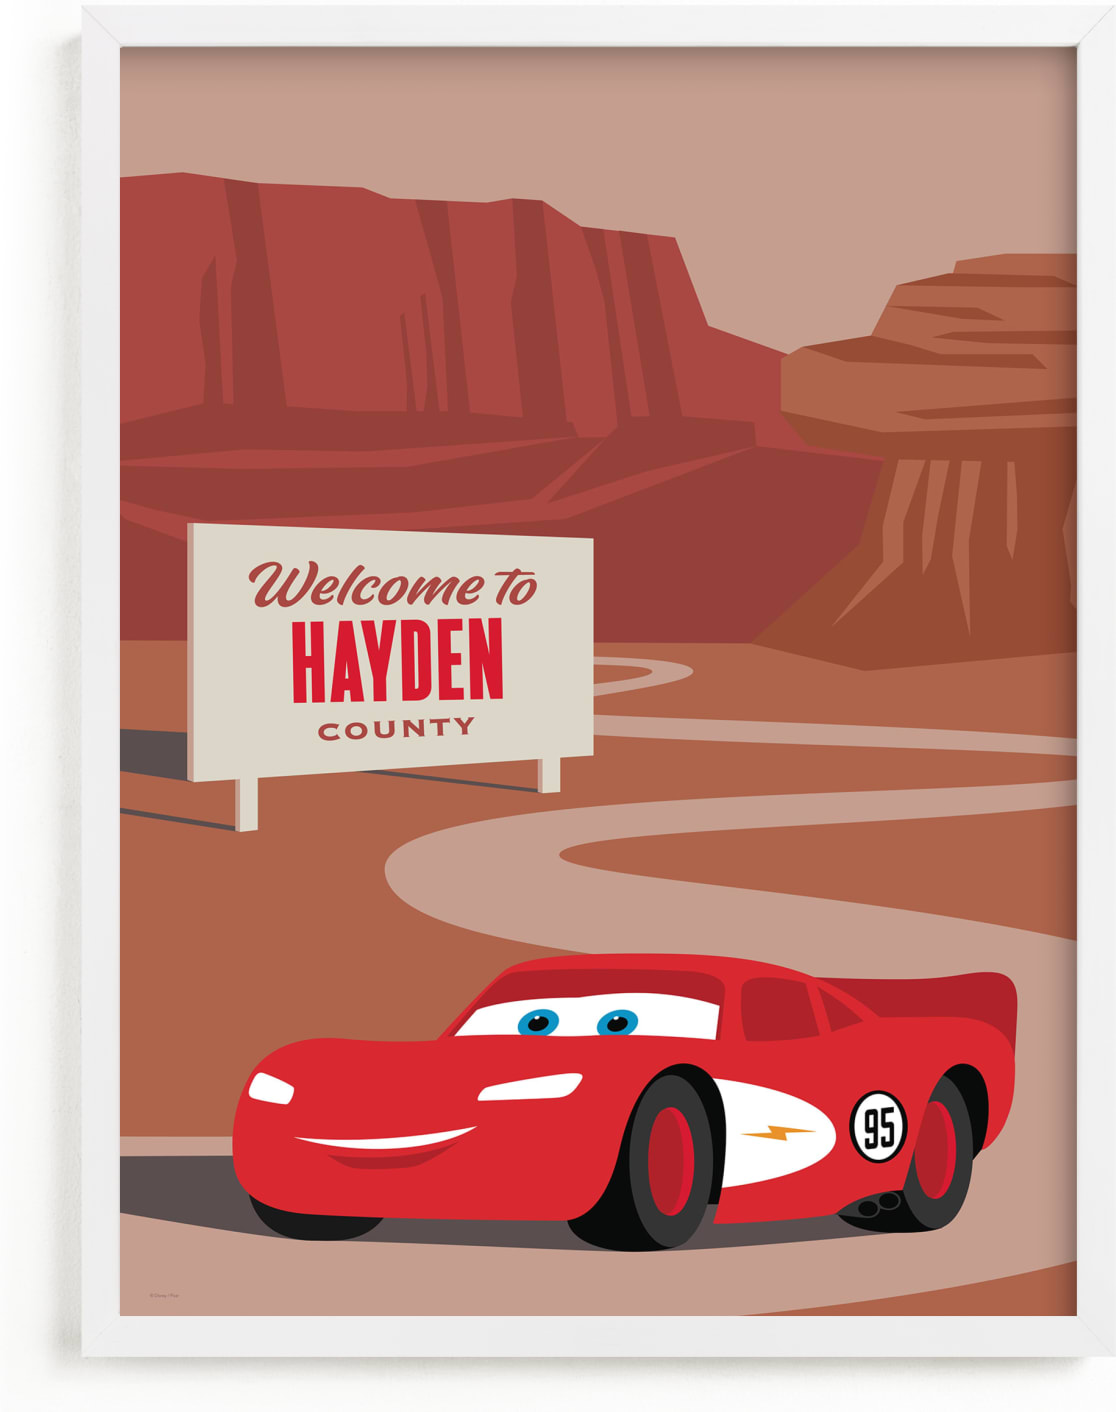 This is a brown disney art by Jill Means called Lightning McQueen Route 66 from Disney and Pixar's Cars.